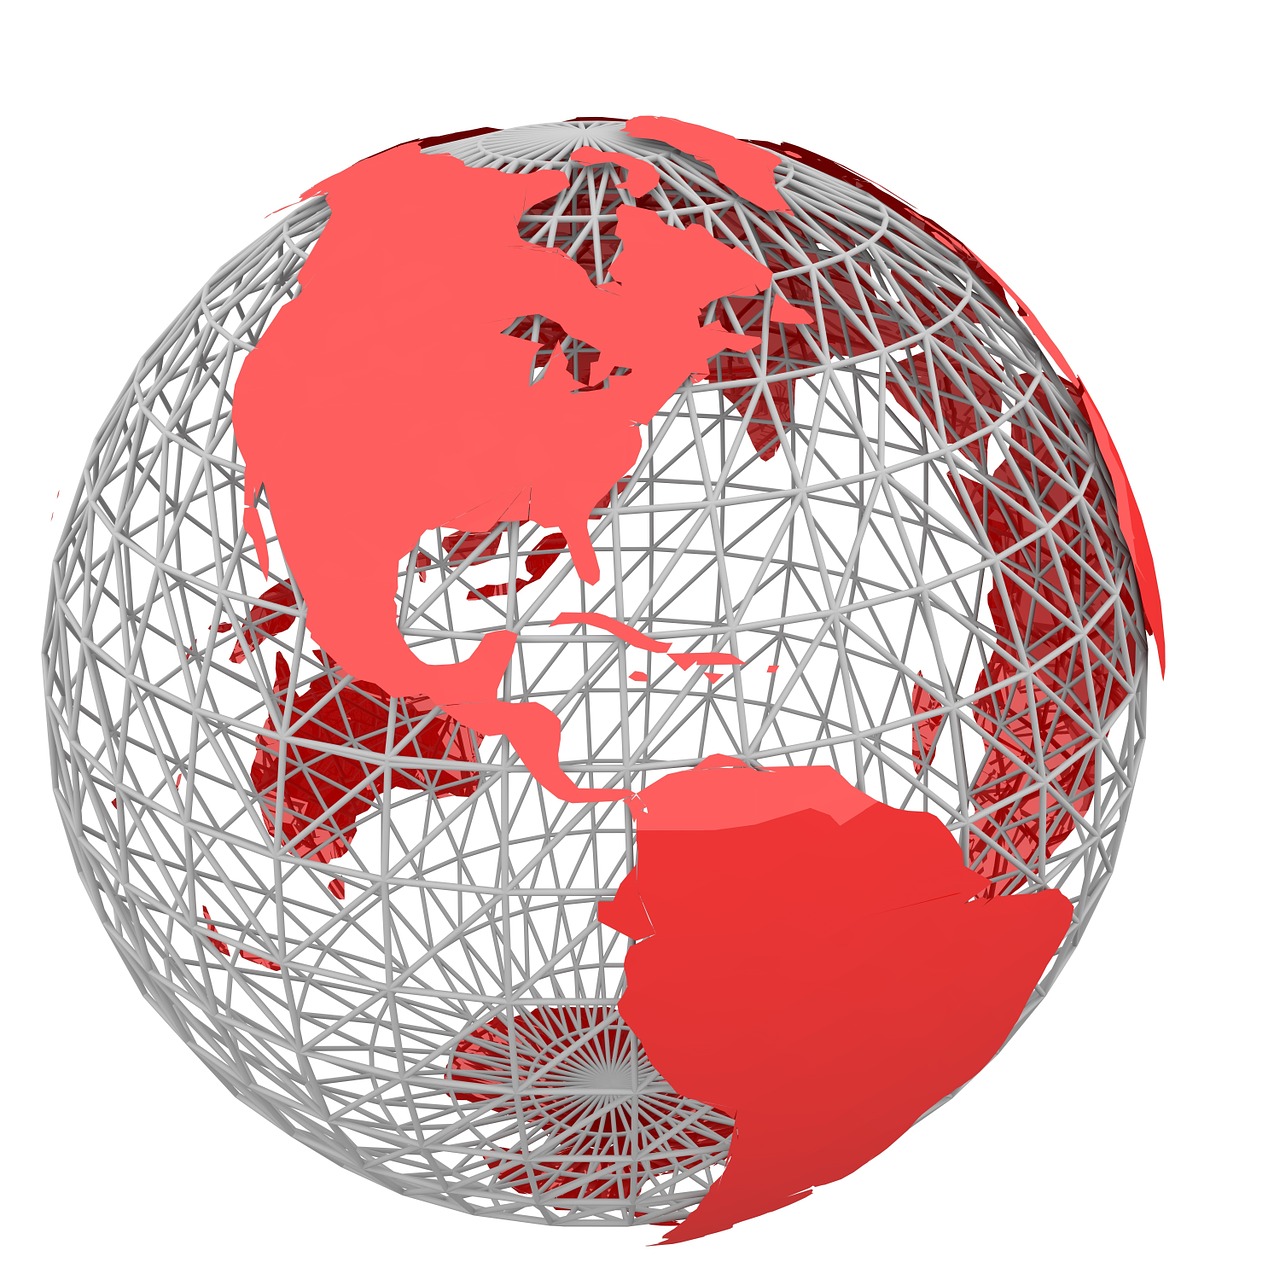 Wireframe sphere with a red metallic image of the global landmasses upon it.